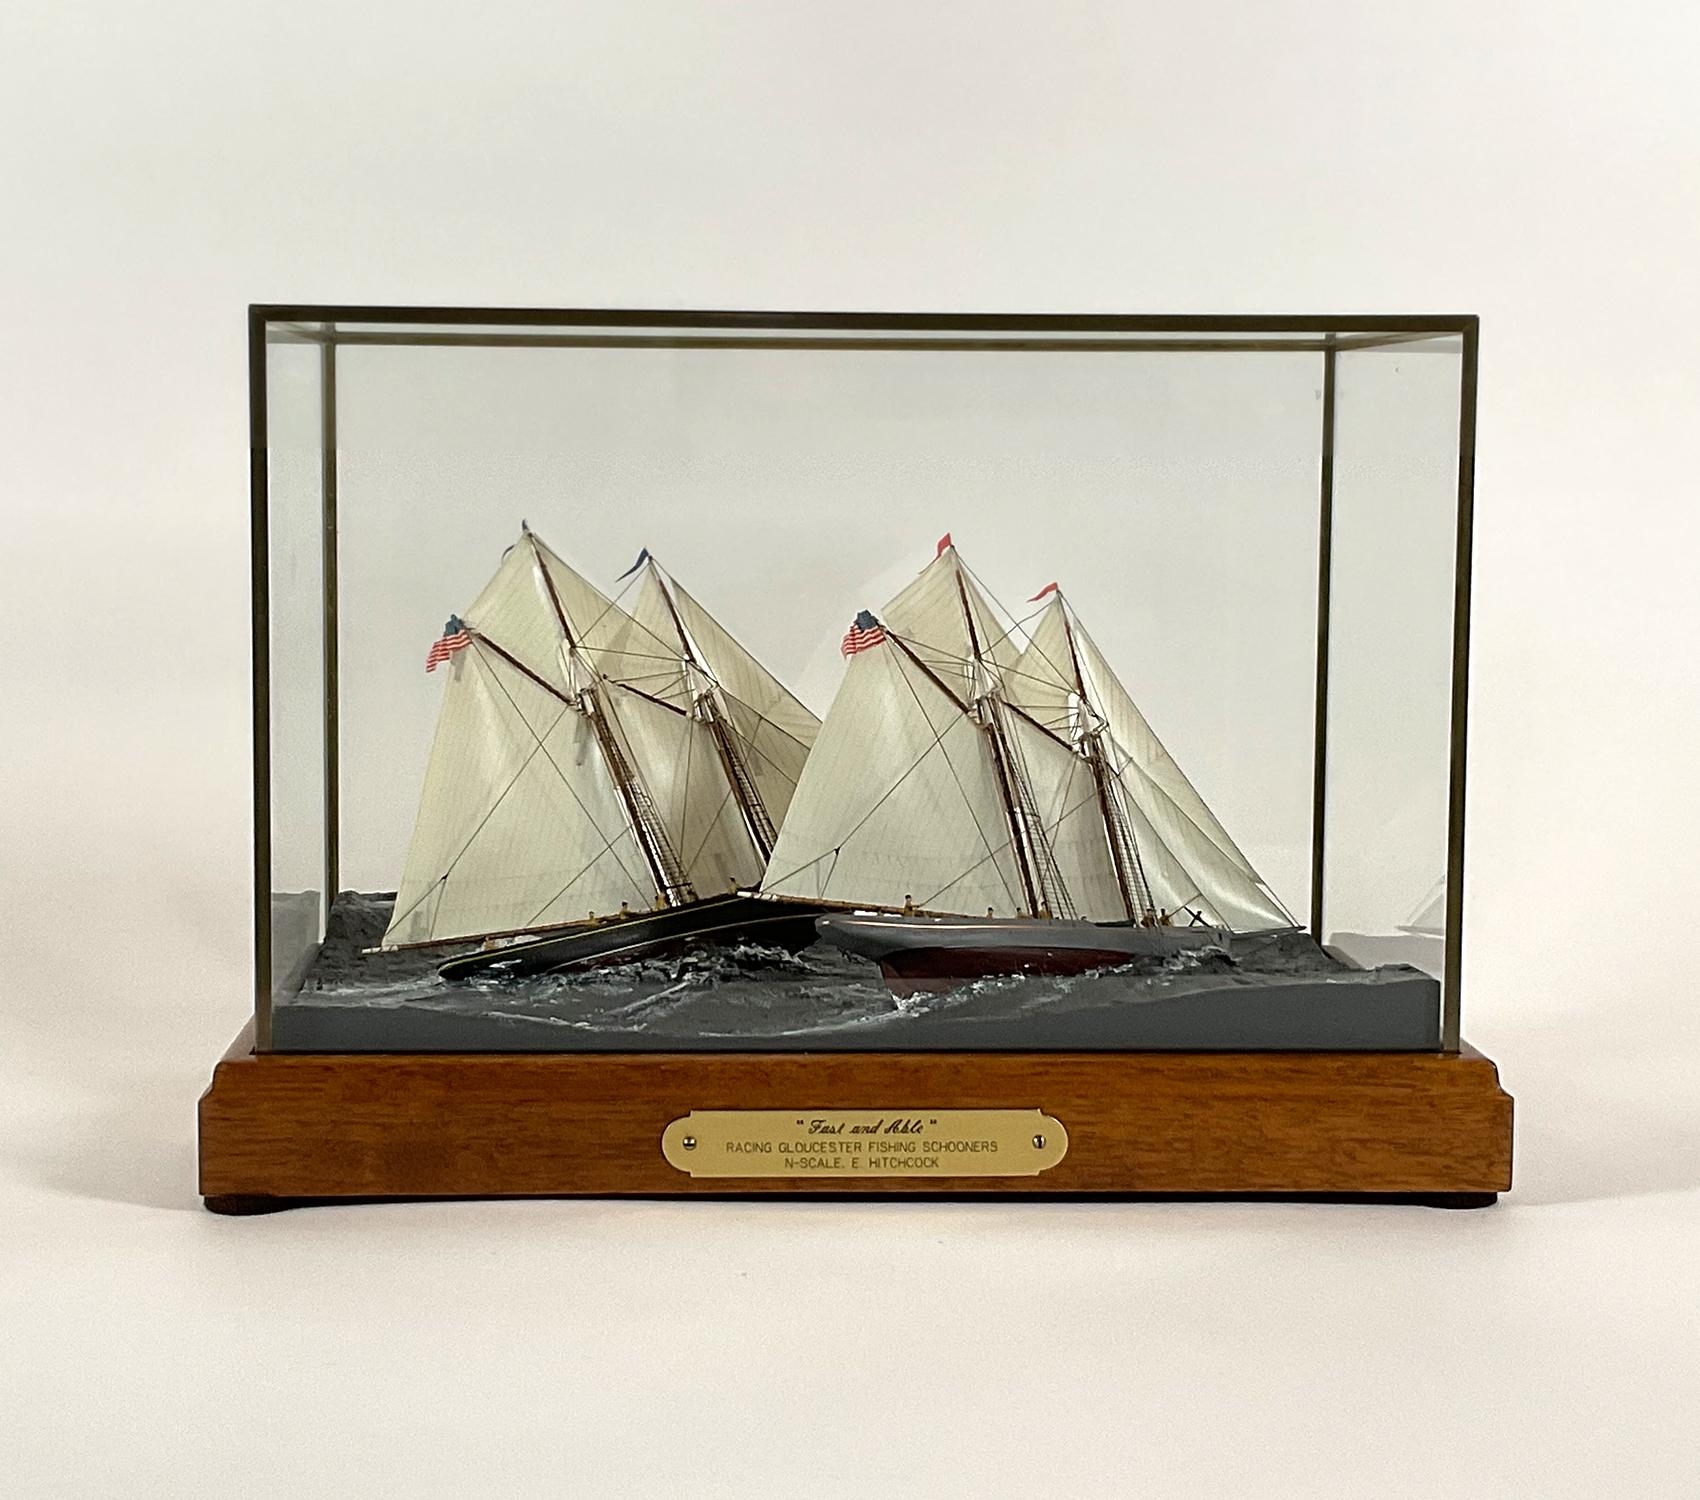 Fabulous nautical diorama showing two Gloucester fishing schooners racing under full sail with crews on board. Vessel details include cabins, hatches, dories, companion ways, helms, etc. Set into a composition ocean sailing at an angle through